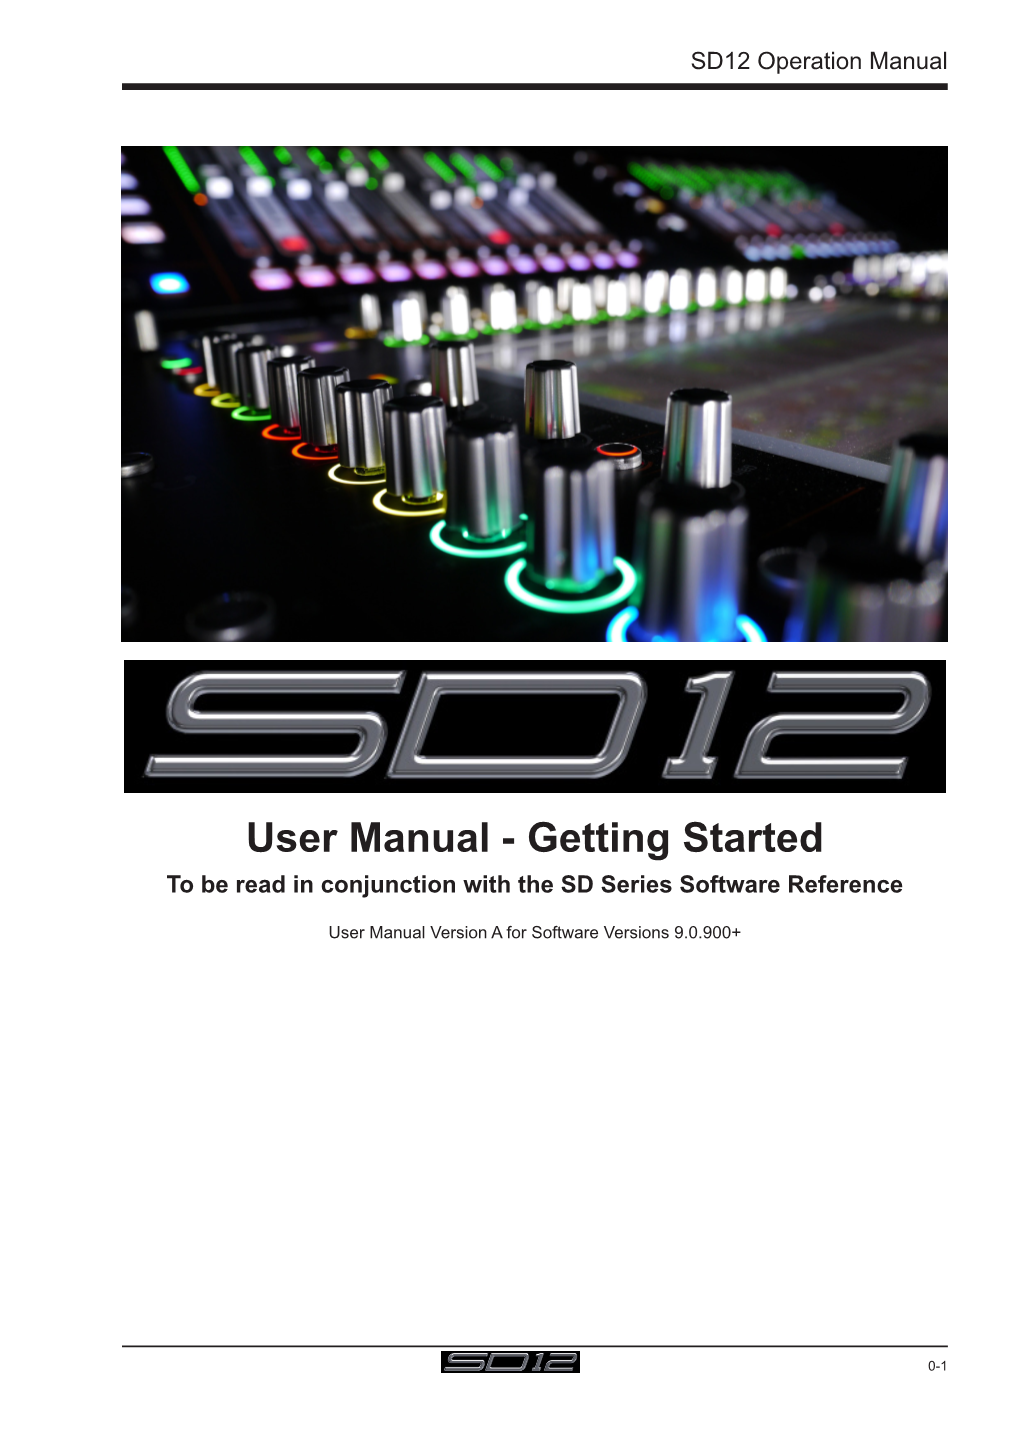 User Manual - Getting Started to Be Read in Conjunction with the SD Series Software Reference